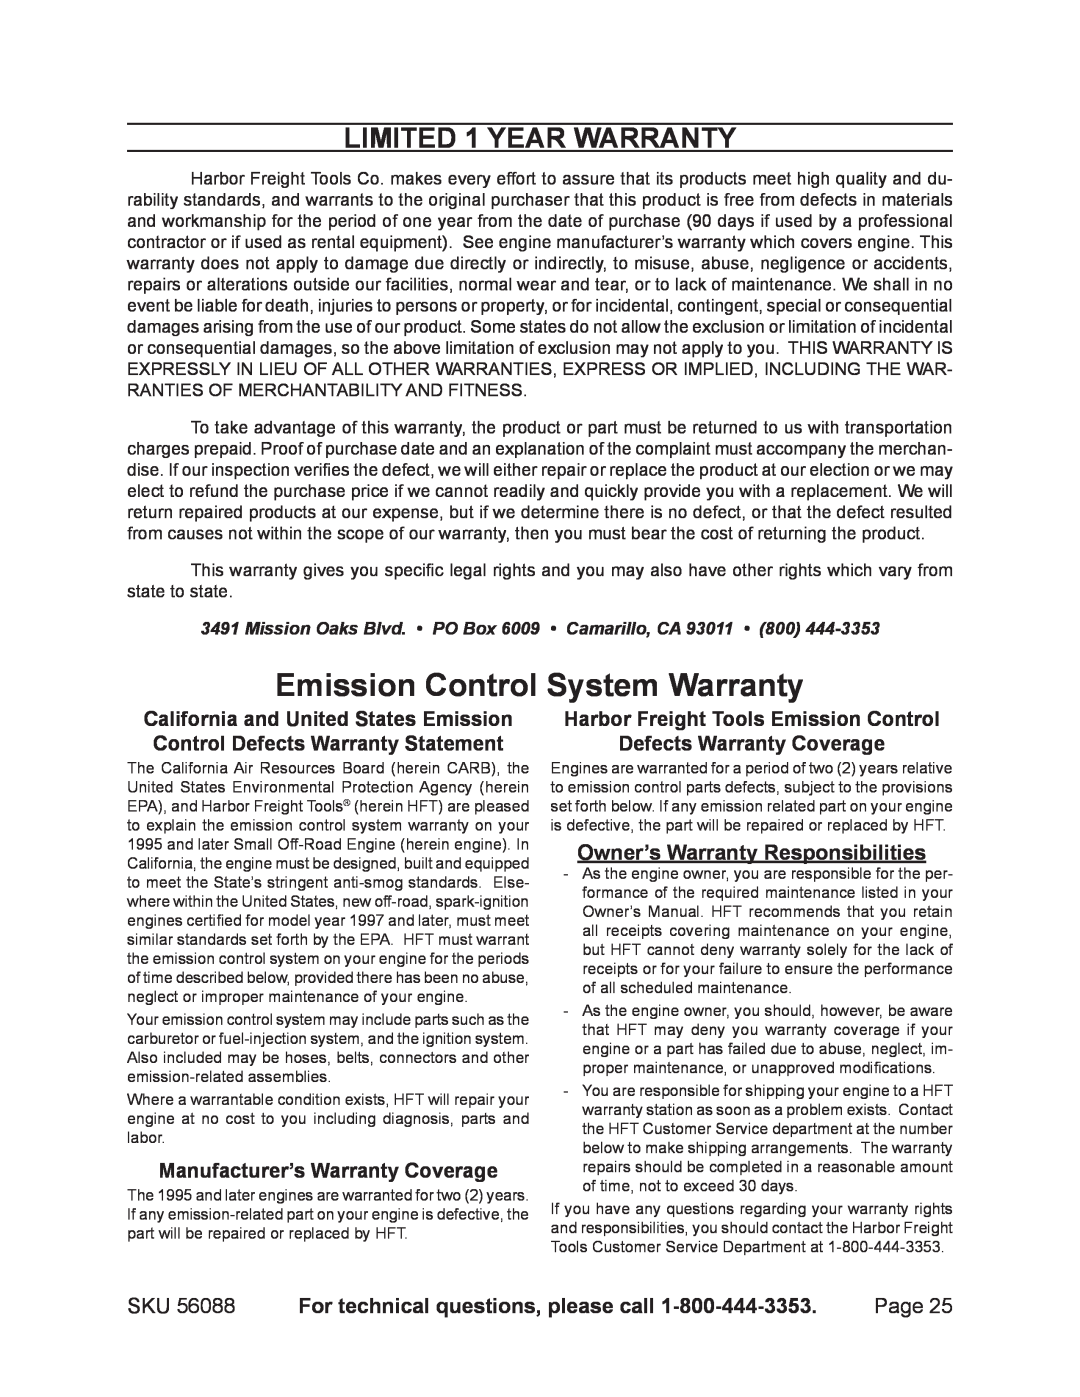 Harbor Freight Tools 56088 Emission Control System Warranty, Limited 1 year warranty, Owner’s Warranty Responsibilities 